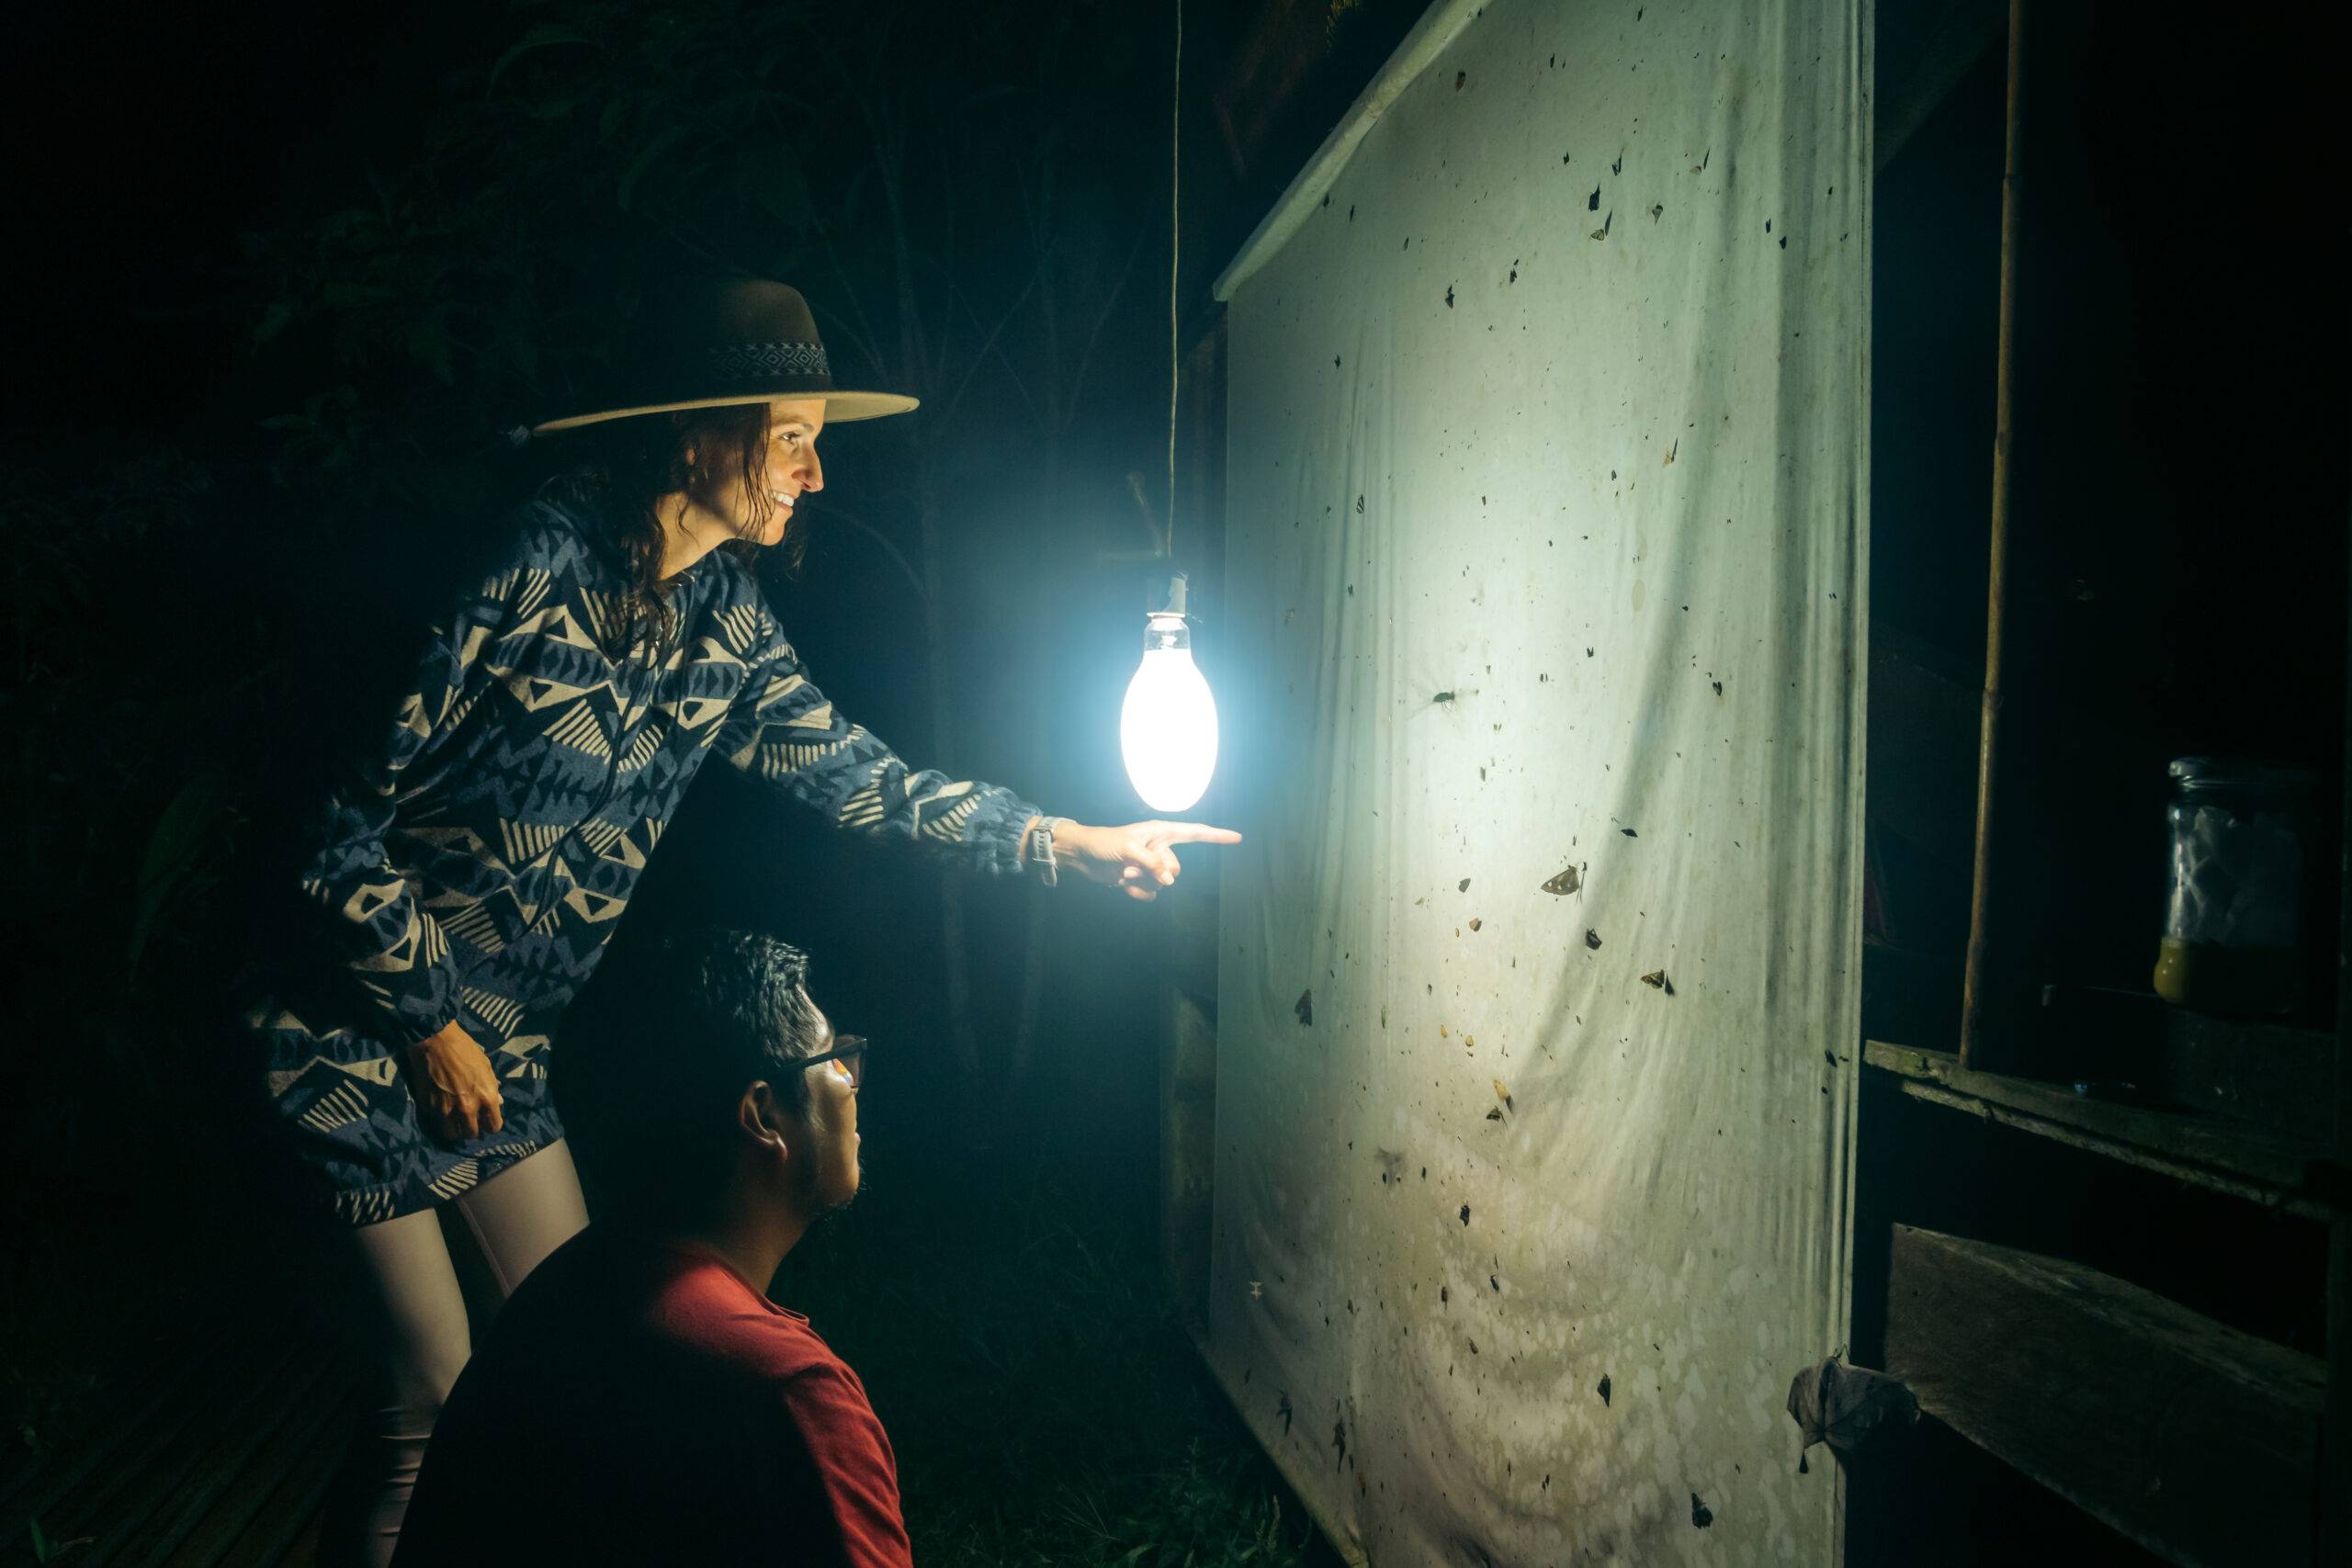 White woman with traveler clothes and latin man smiling while doing conservation work at night with a light trap for insects. They are doing ecotourism activities in the Peruvian Amazon Jungle.